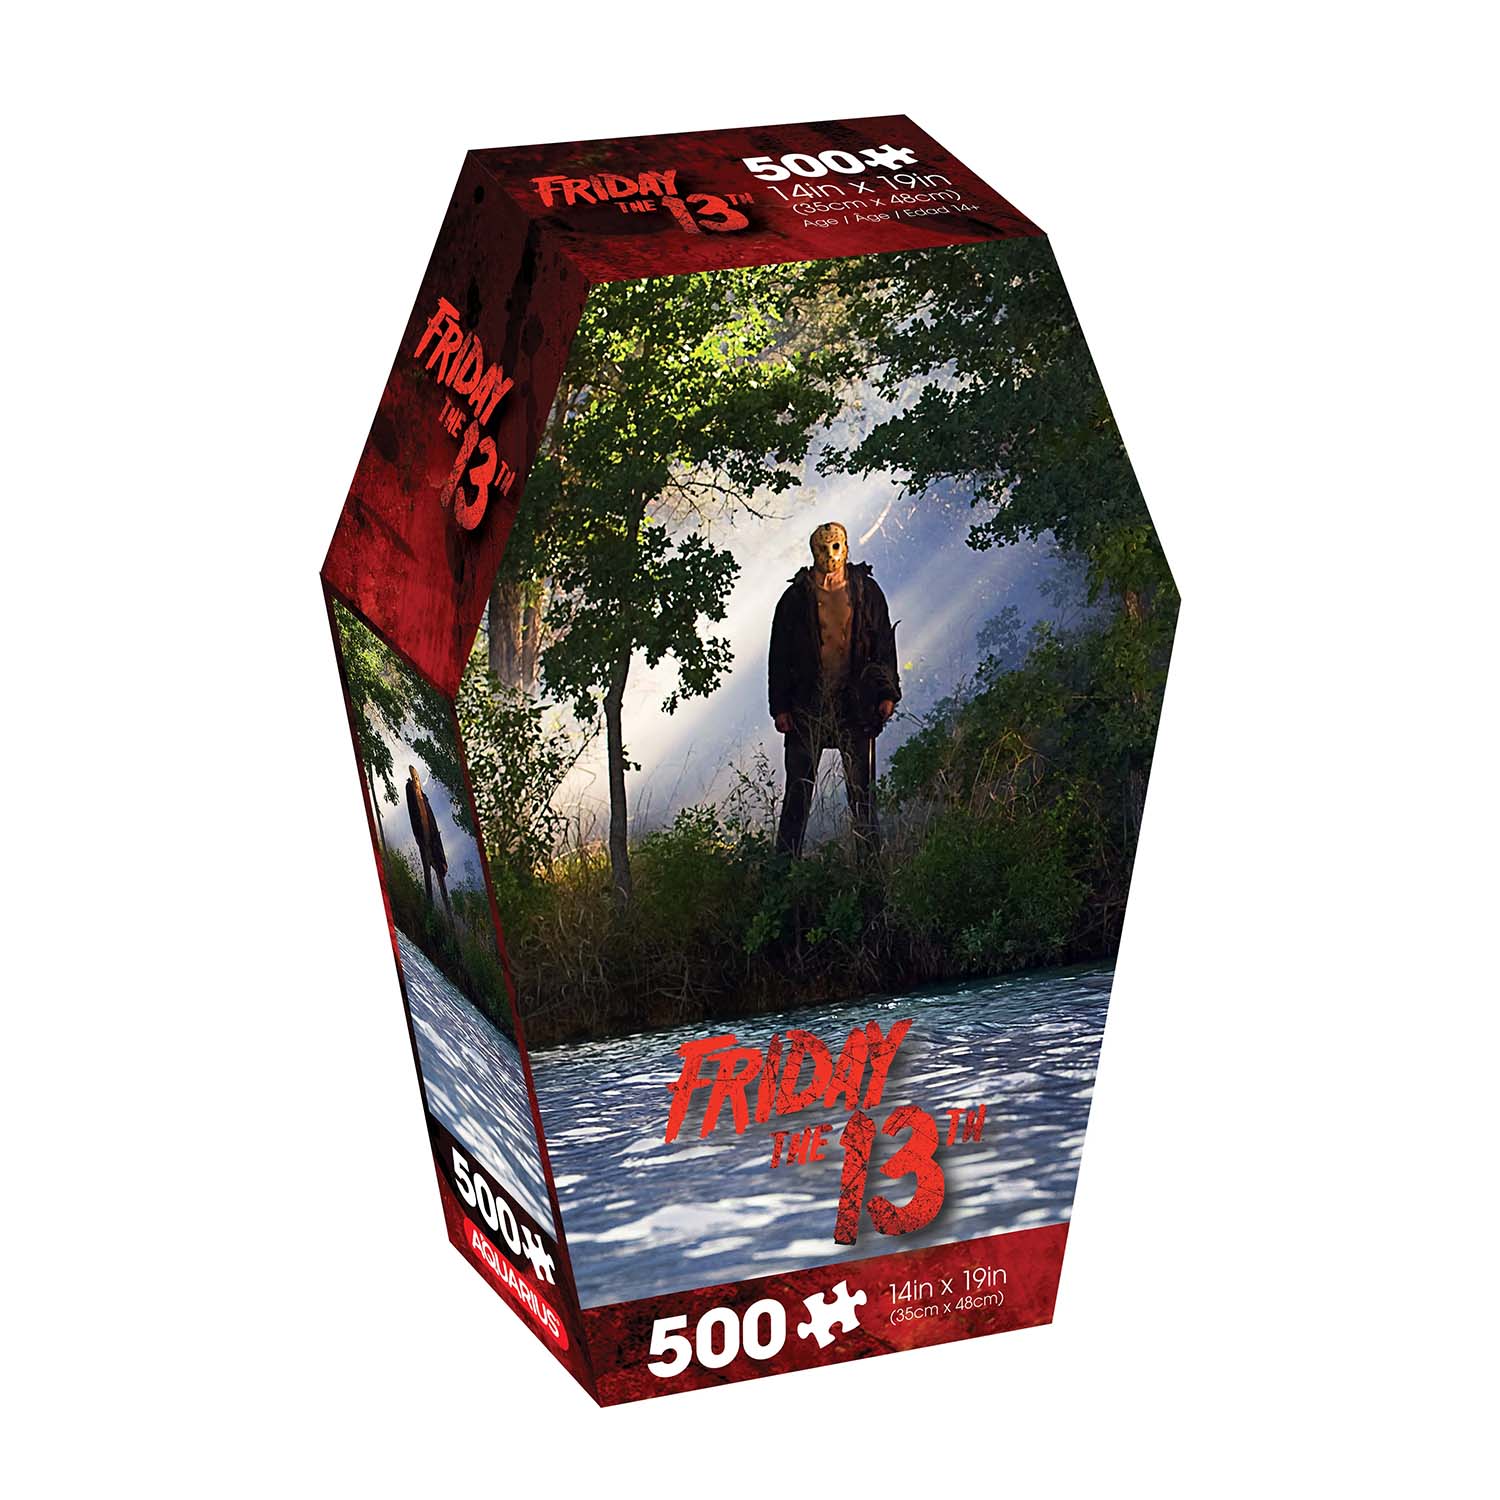 Friday The 13th Coffin Box  Halloween Jigsaw Puzzle